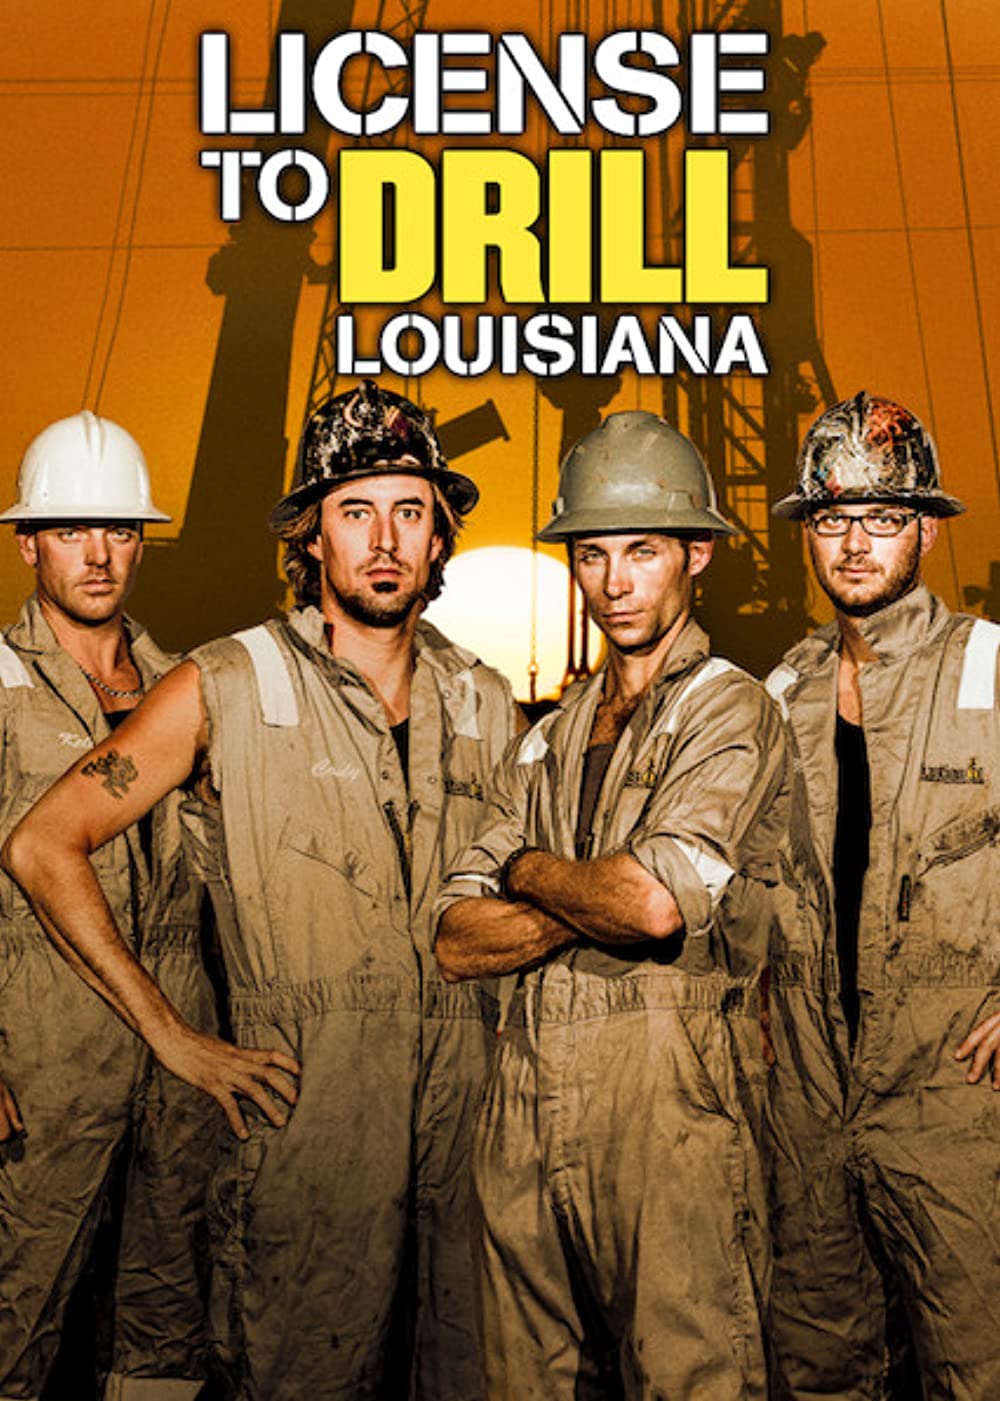 Furieux Forages Louisiane (Licence To Drill Louisiana)